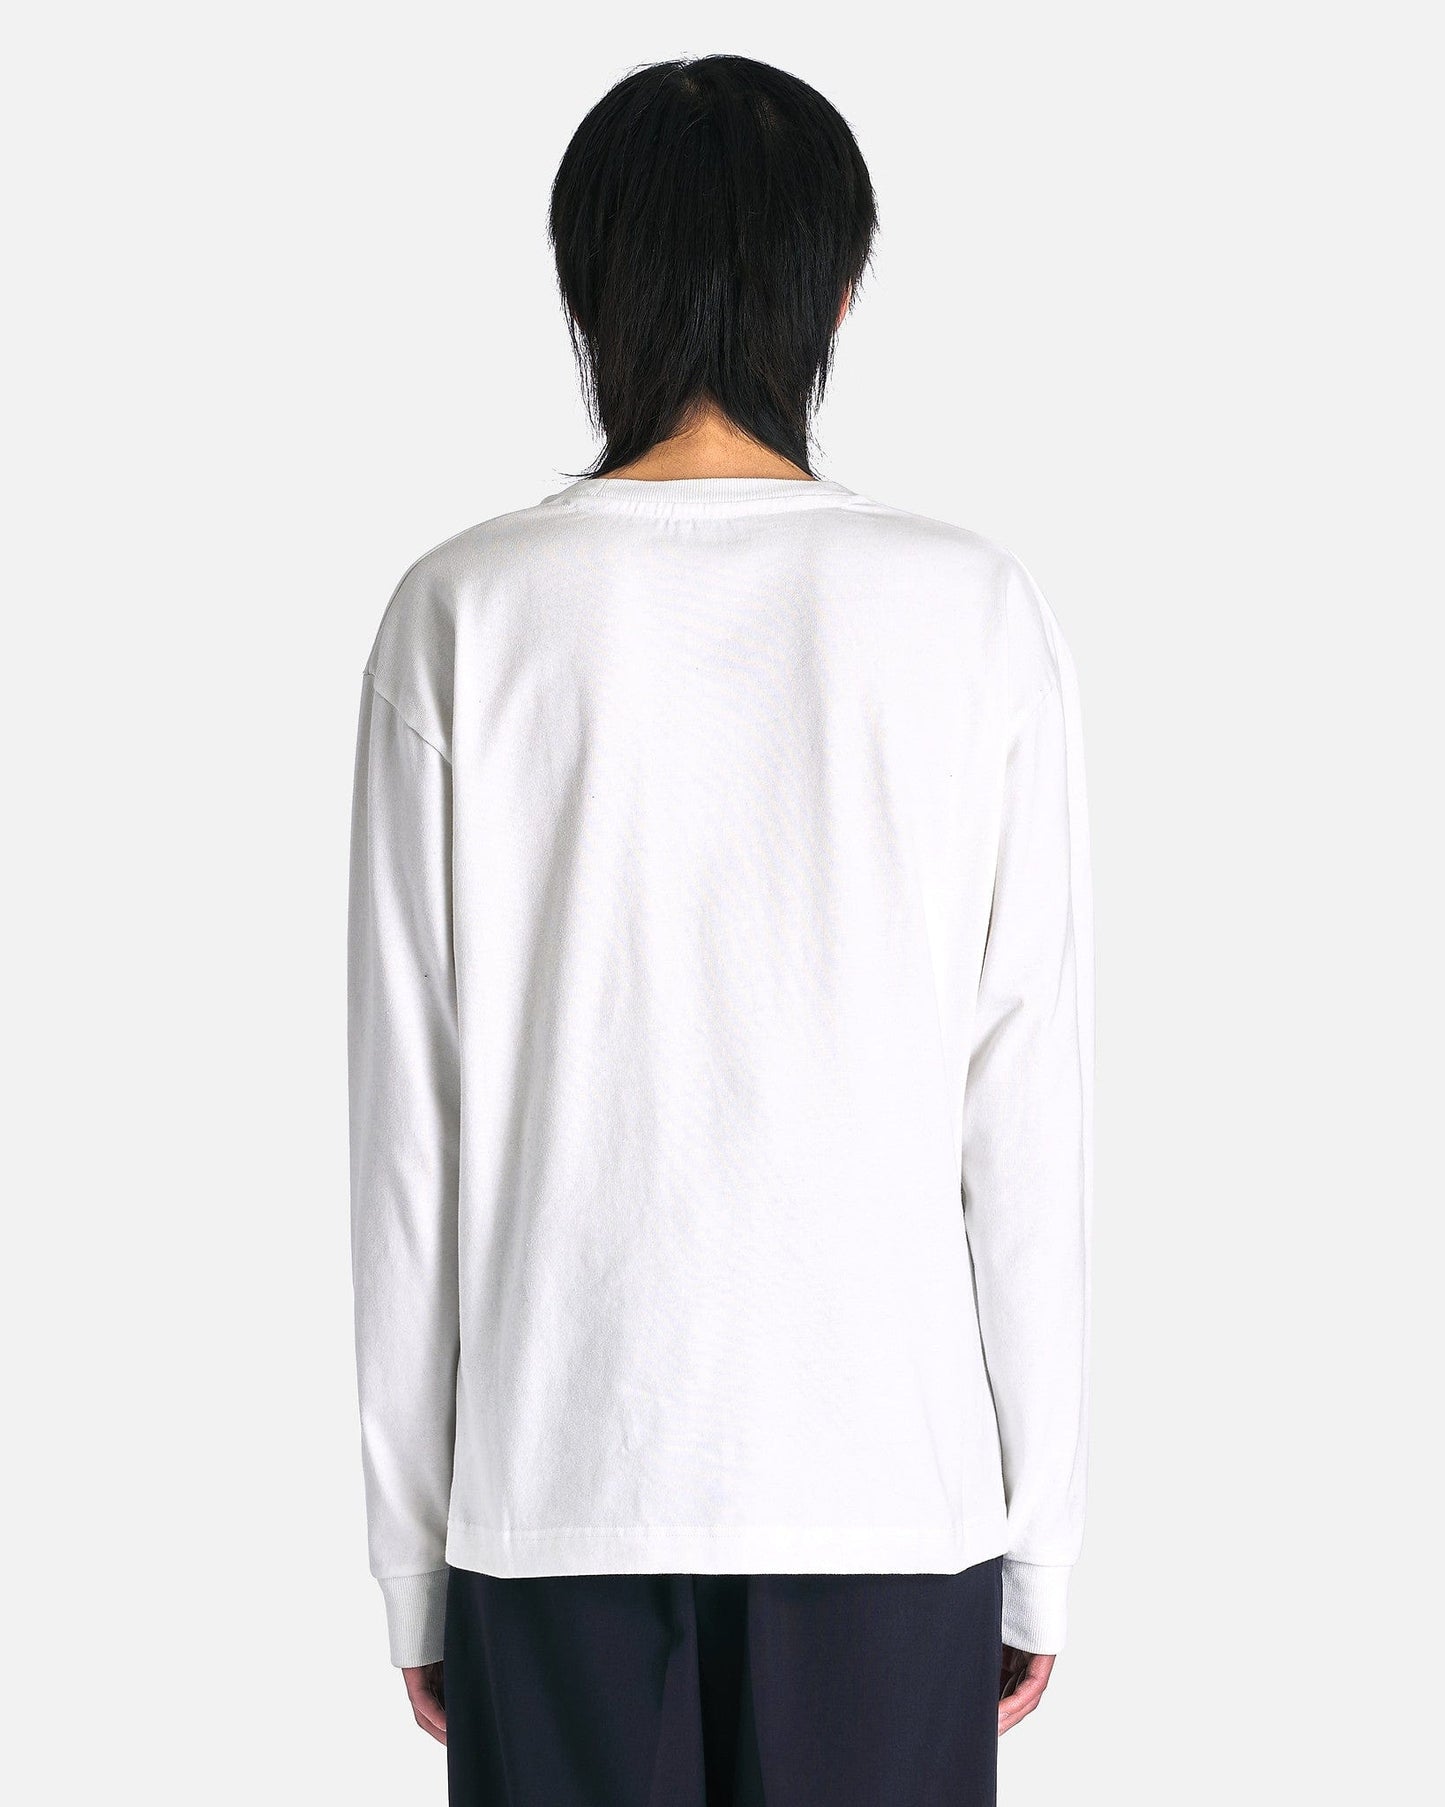 Kenzo Men's Shirts Verdy Long Sleeve in Off White